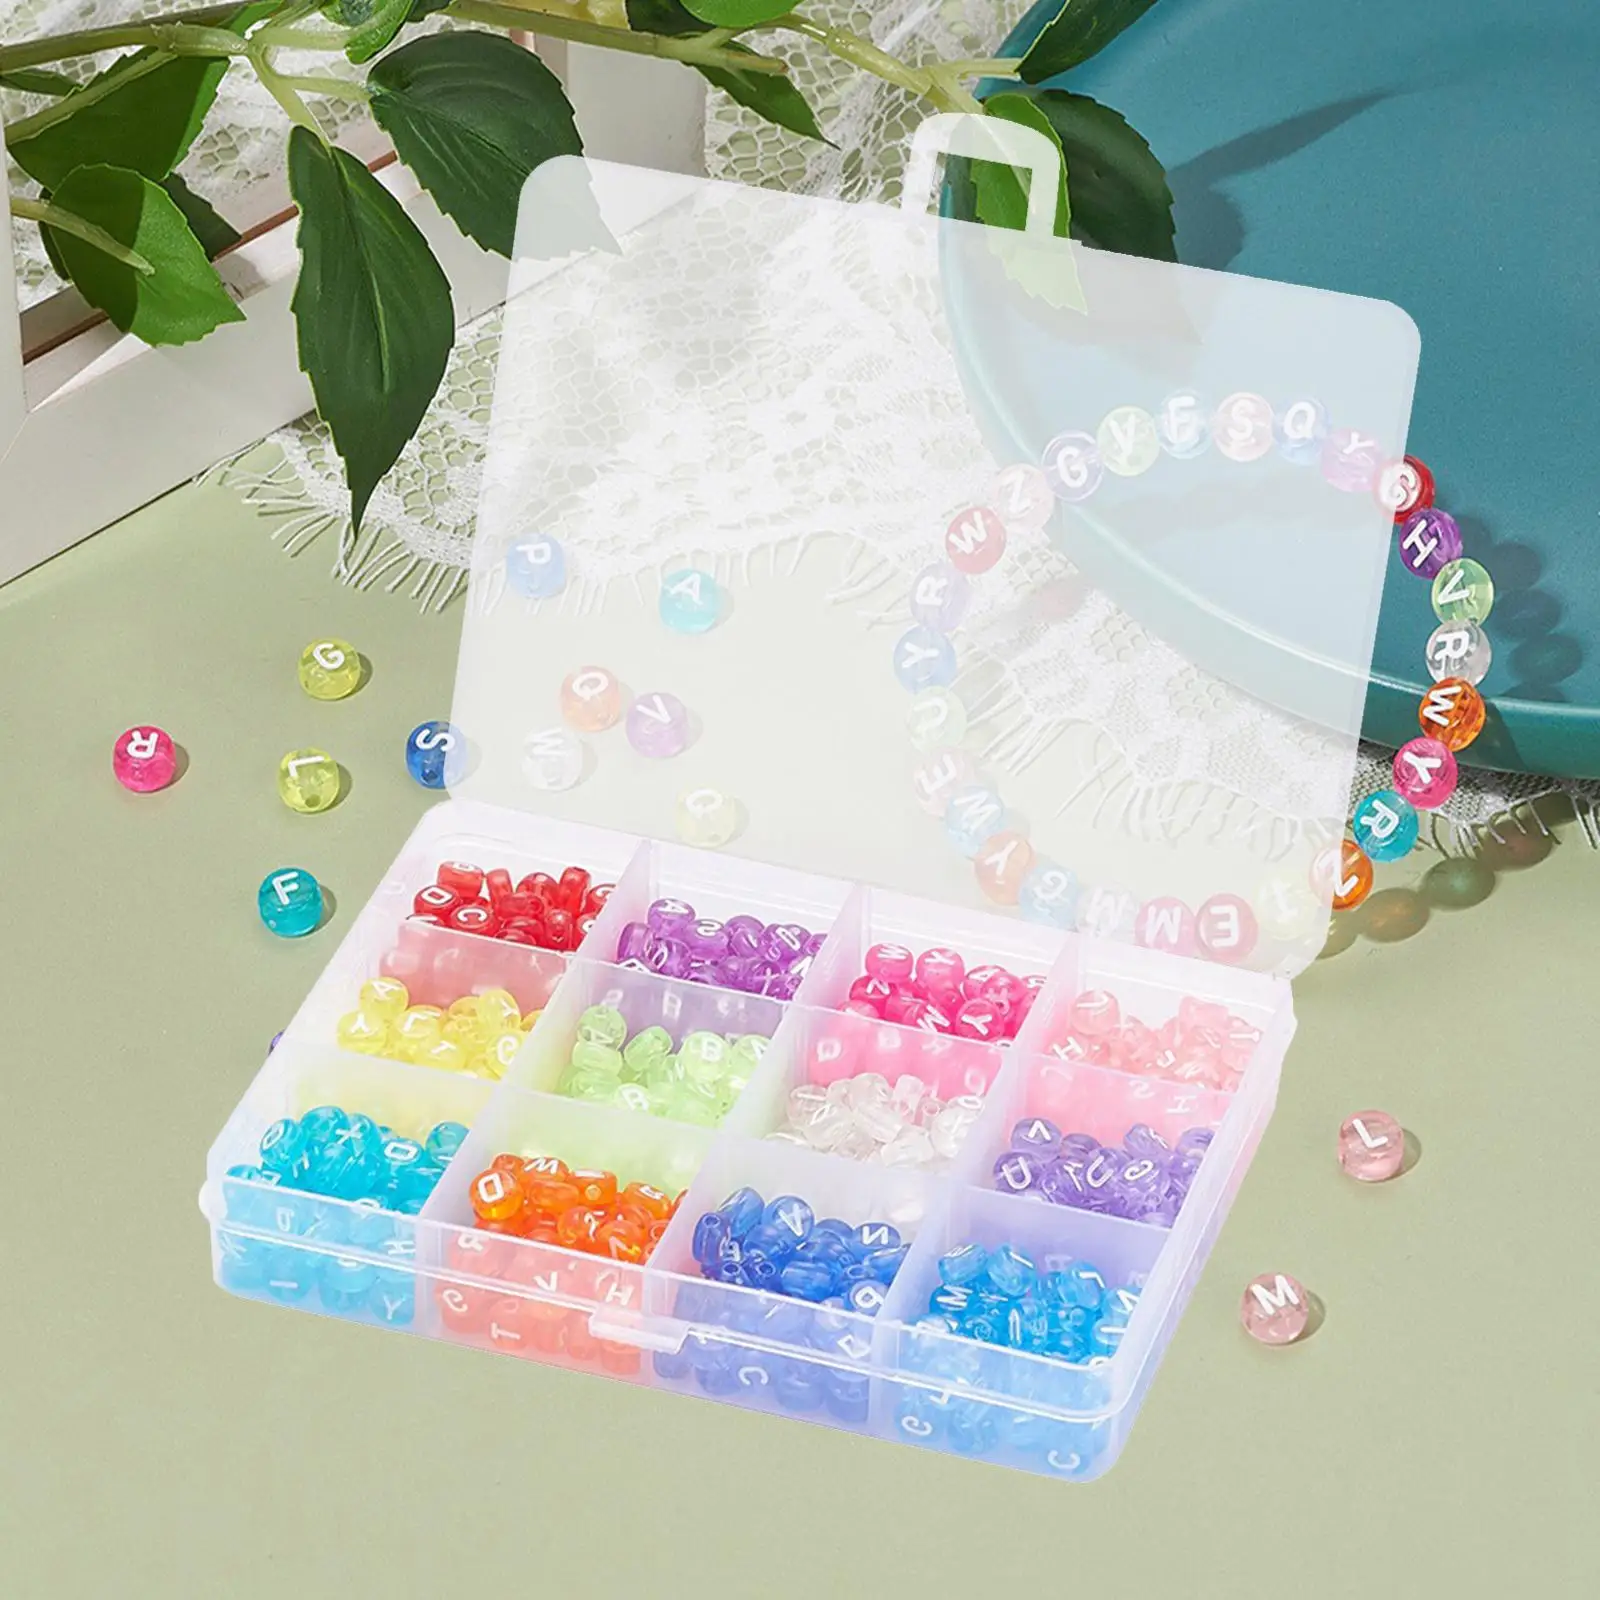 600Pcs Round Acrylic Alphabet Letter Beads DIY 12Colors a-Z Letter Beads for Earring Key Chains Bracelets Jewelry Making